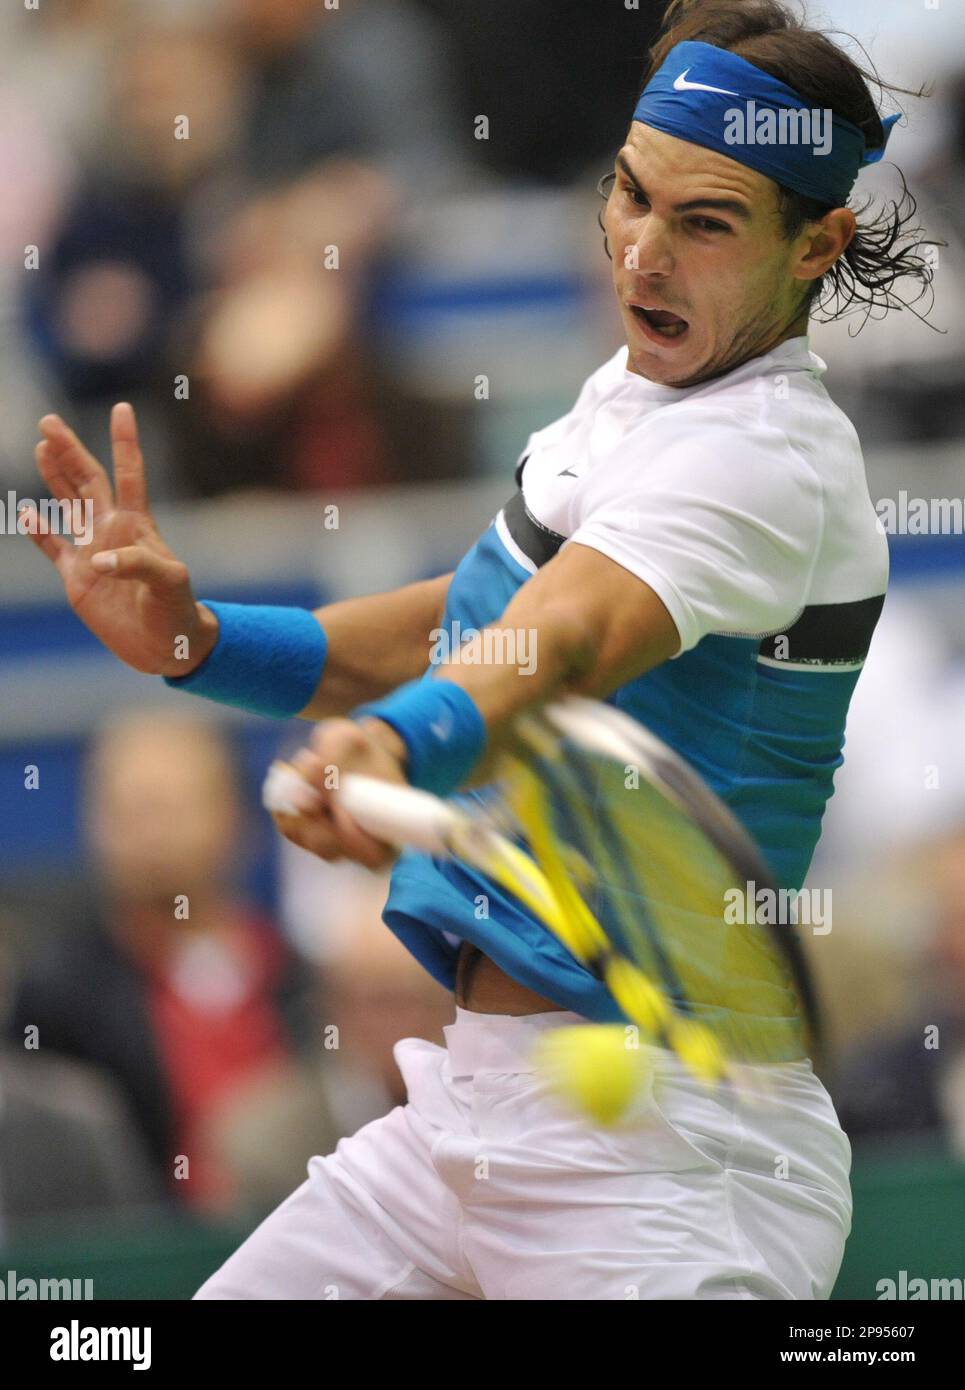 Rafael Nadal of Spain returns the ball to Grigor Dimitrov from Bulgaria at the ABN Amro tennis tournament at AHOY stadium in Rotterdam, Netherlands, Thursday , Feb